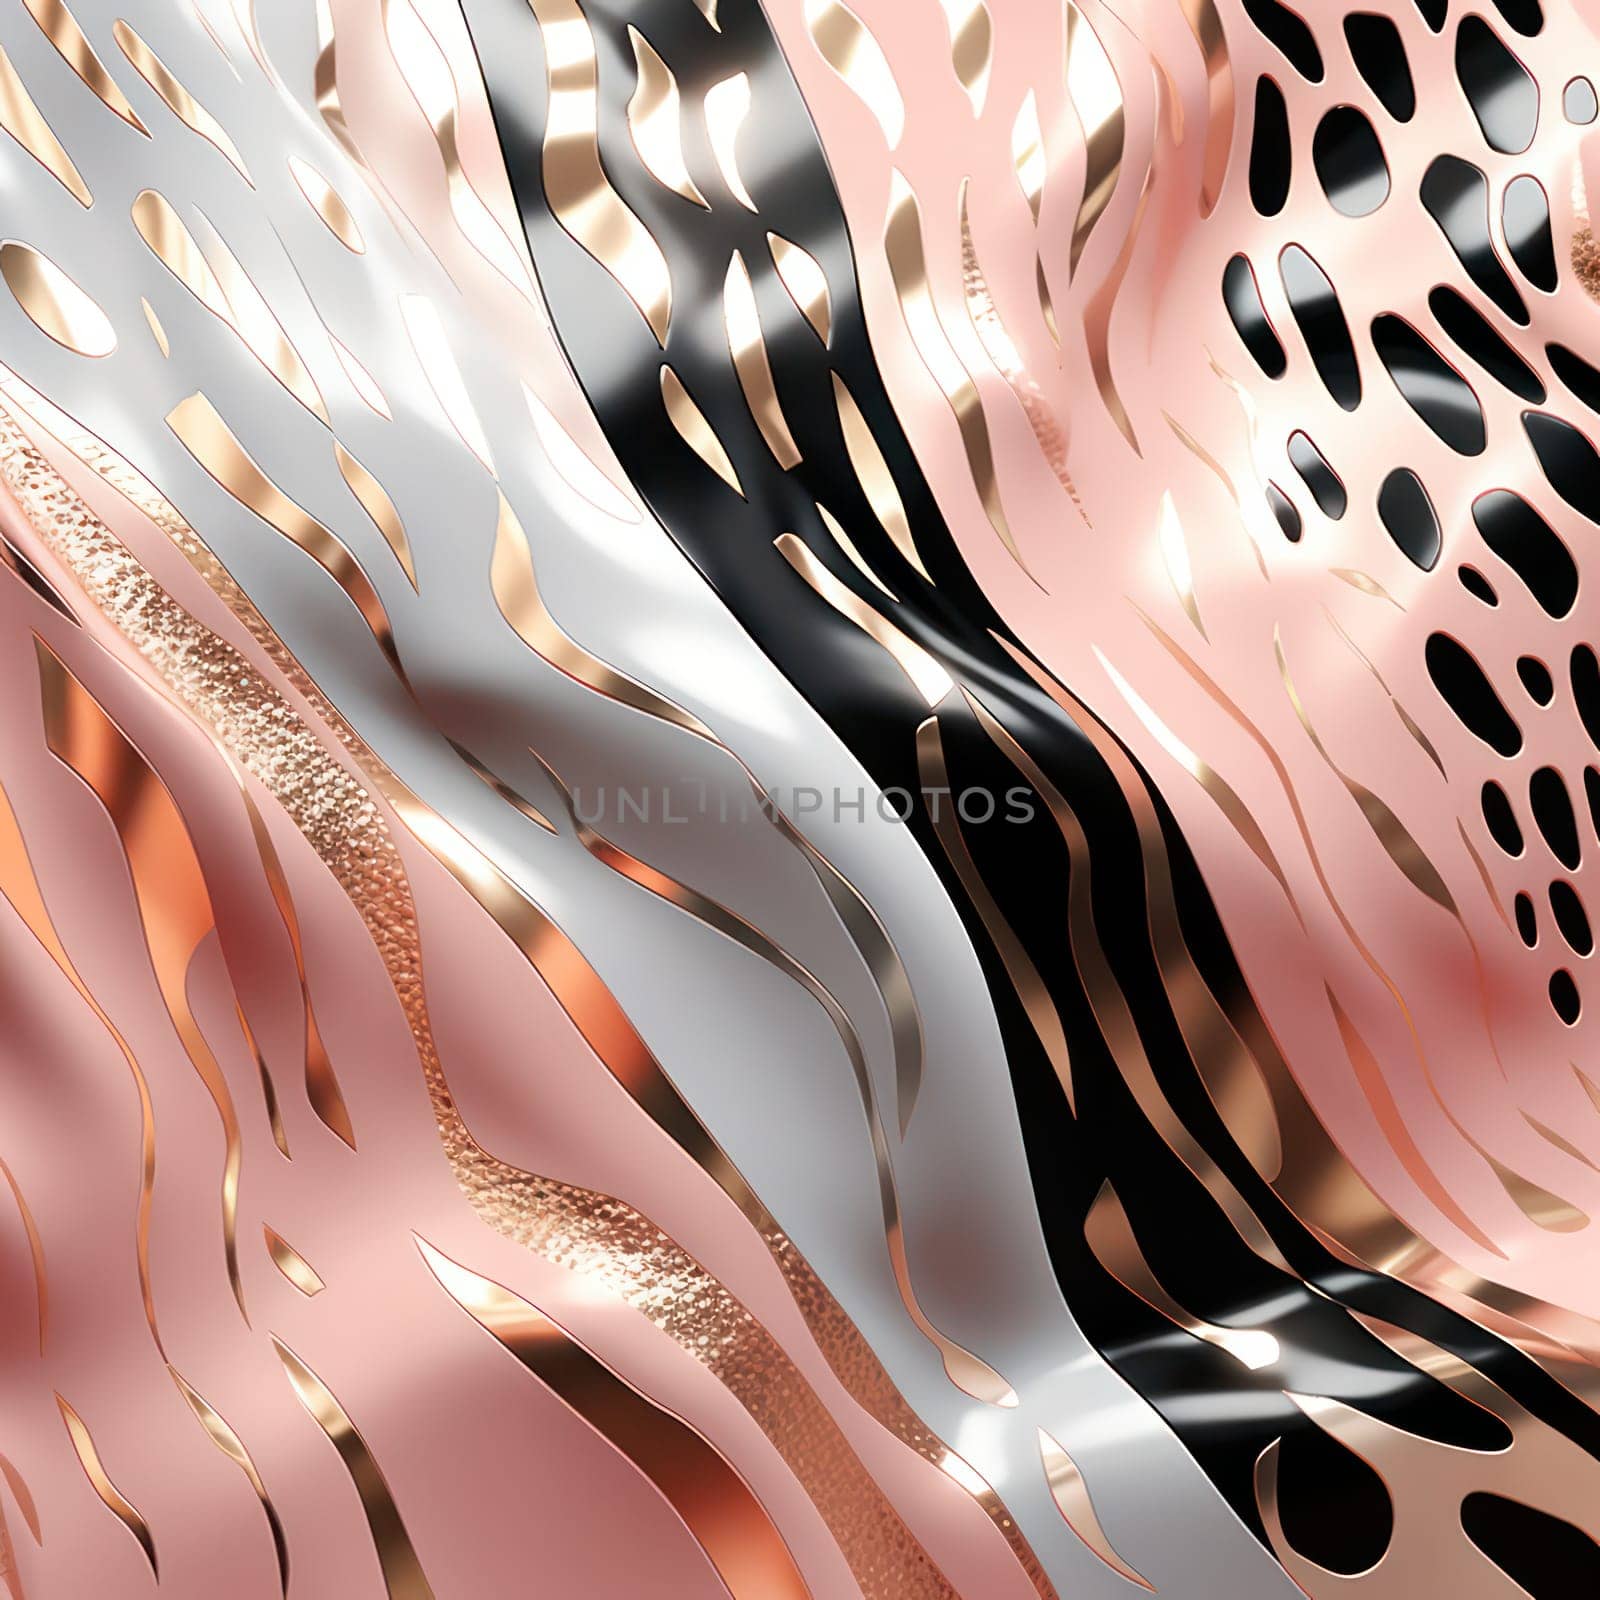 Wavy Gradient: Bright Abstract Pattern on White, with Tiger Skin-like Geometric Shapes and Flowing Watercolor Elements in a Trendy Safari Style